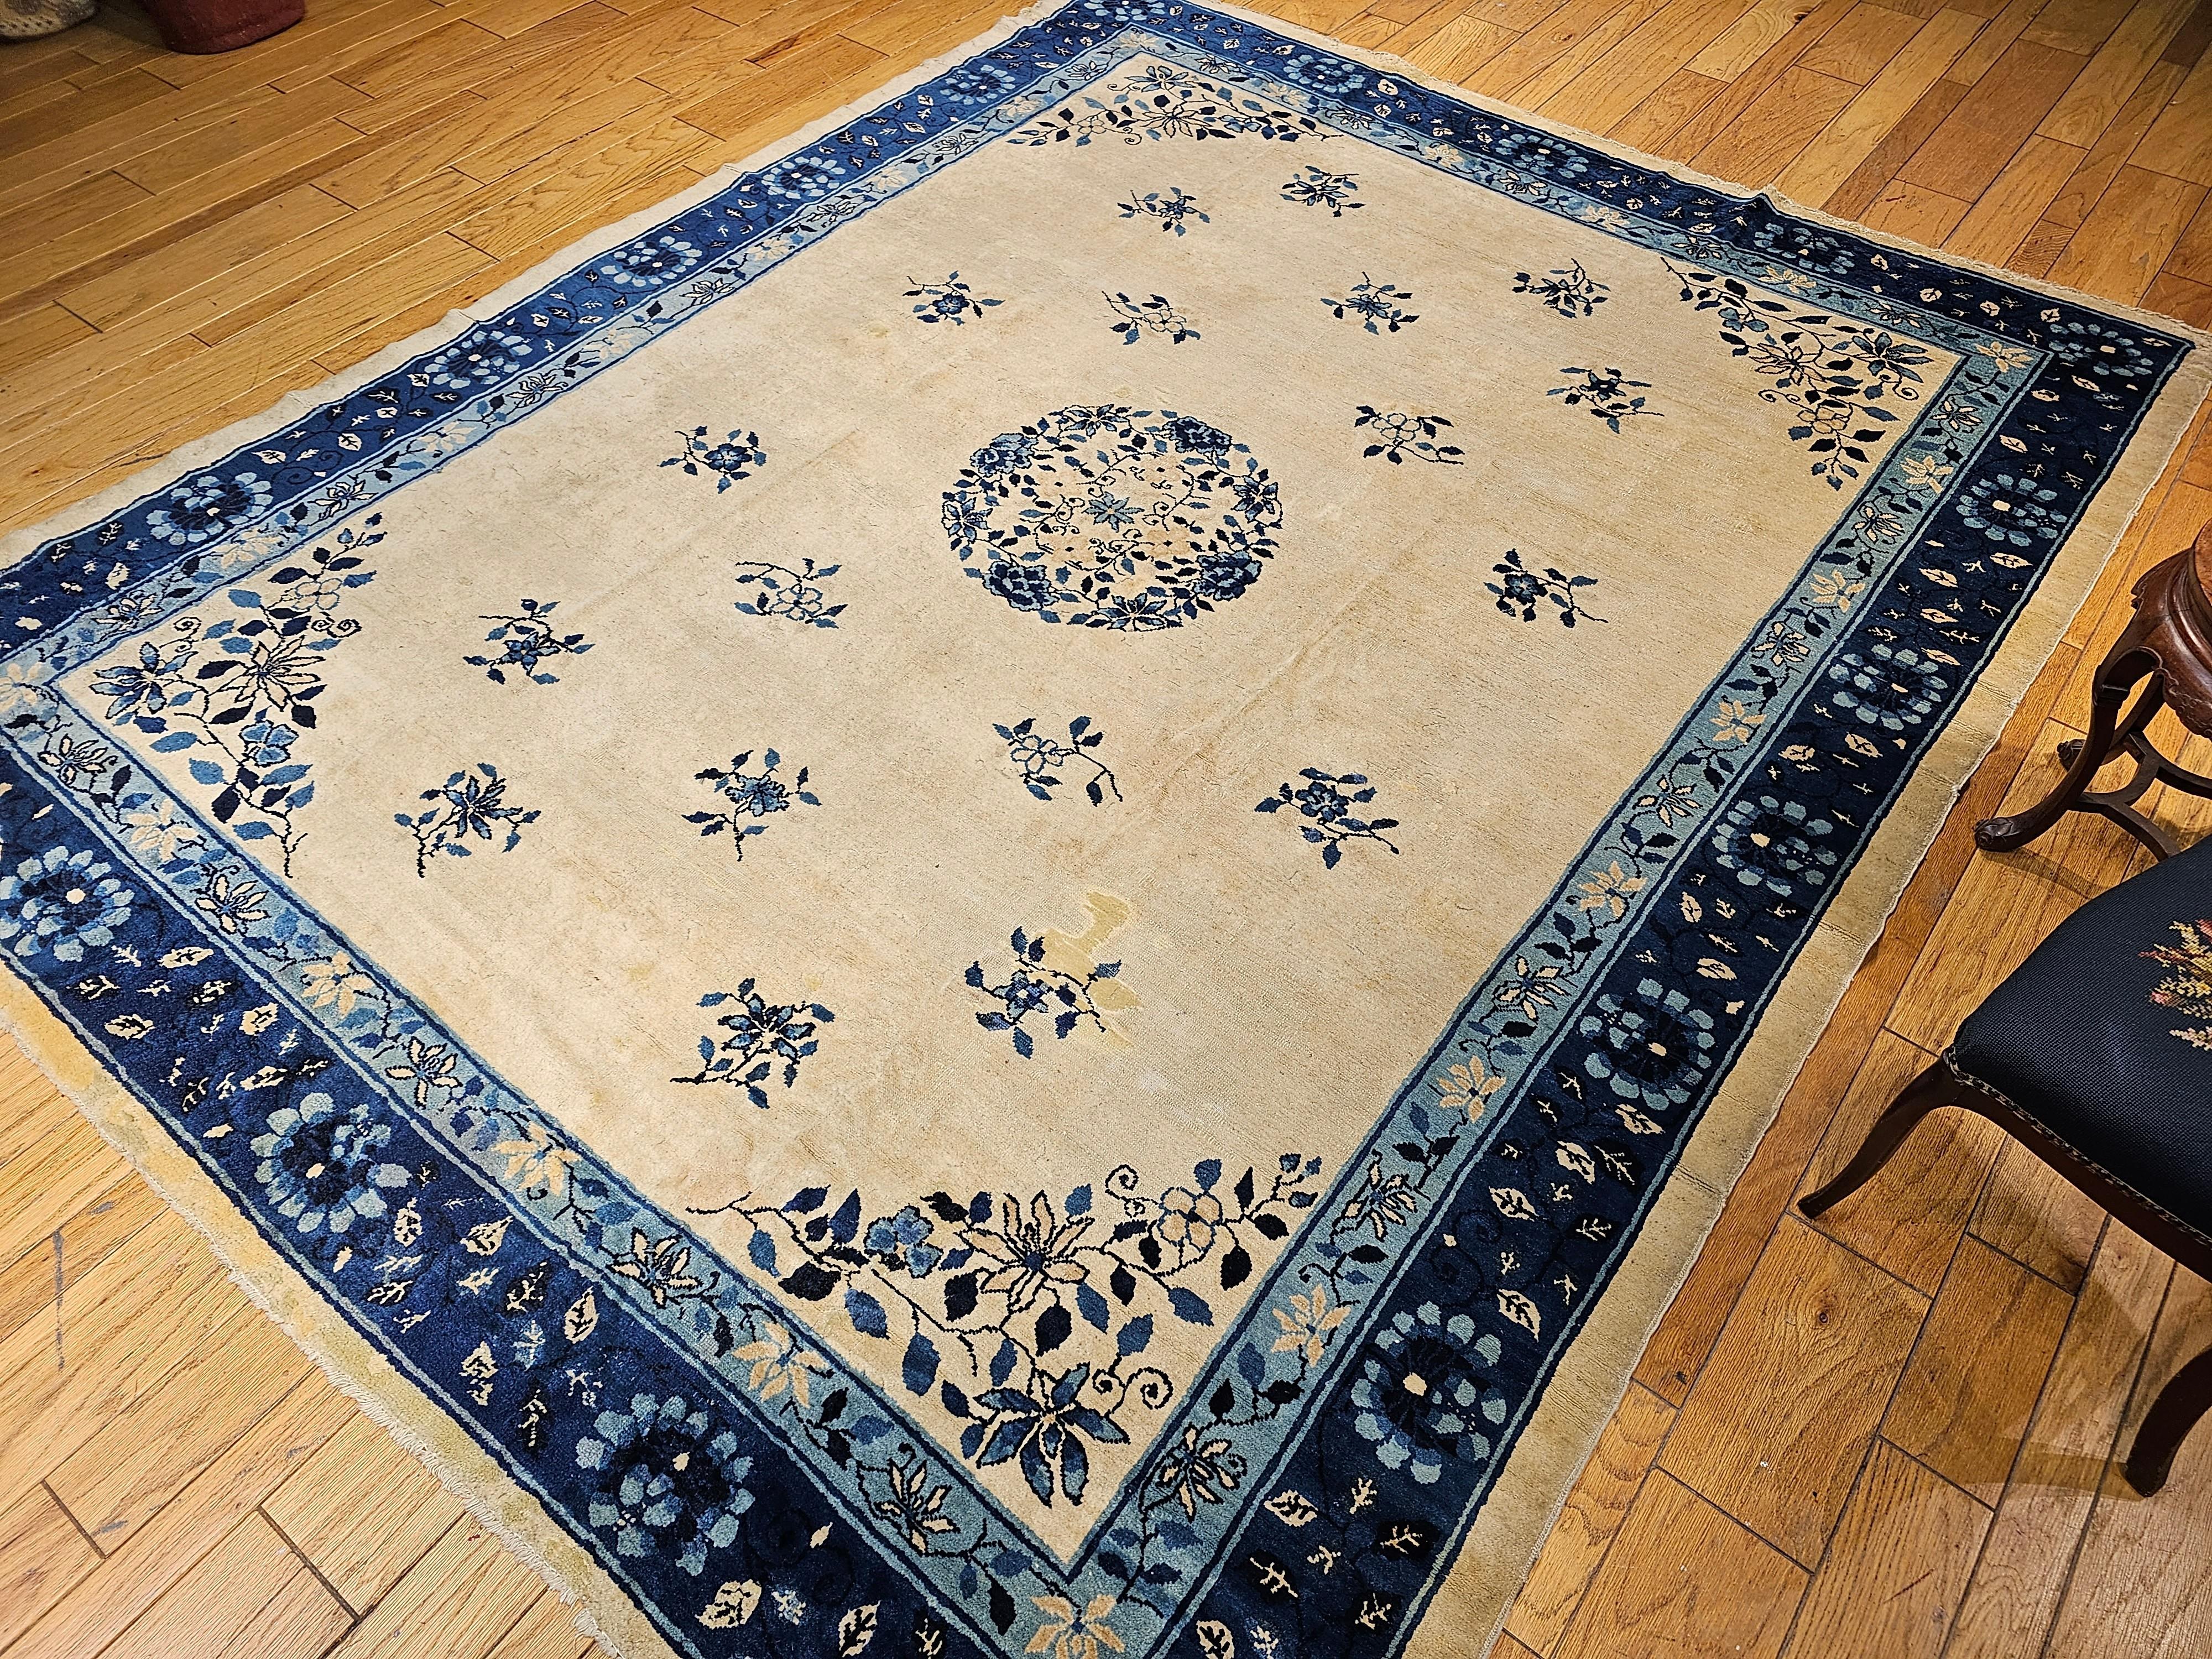 19th Century Room Size Chinese Peking Rug in Ivory, Navy, Baby Blue For Sale 9